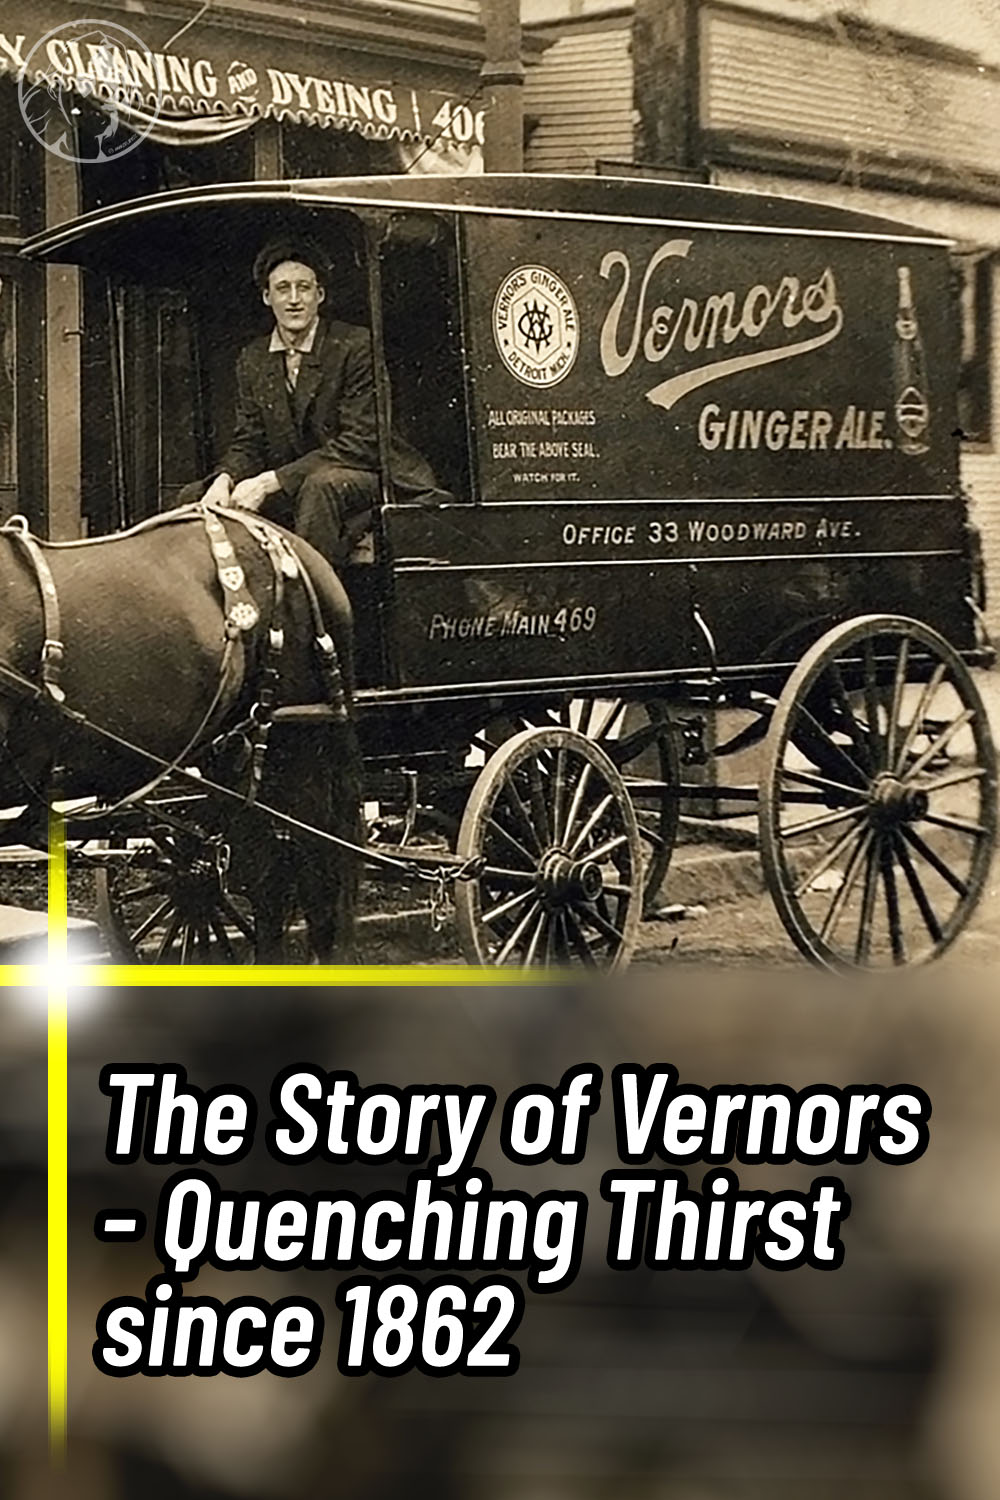 The Story of Vernors - Quenching Thirst since 1862